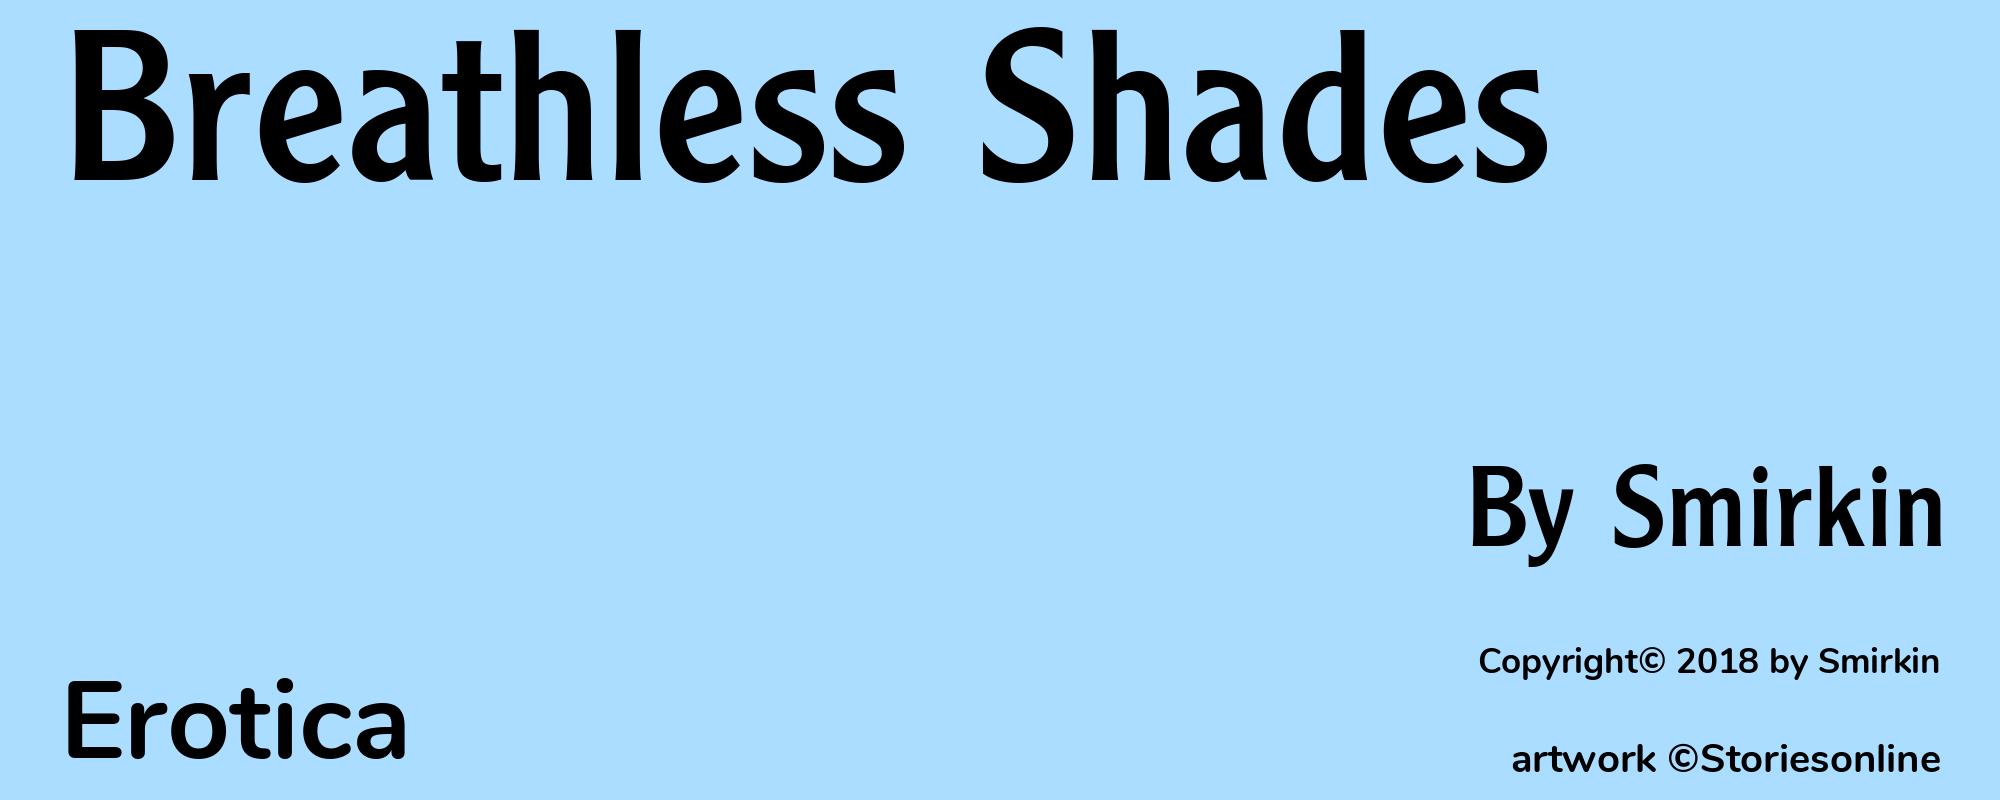 Breathless Shades - Cover